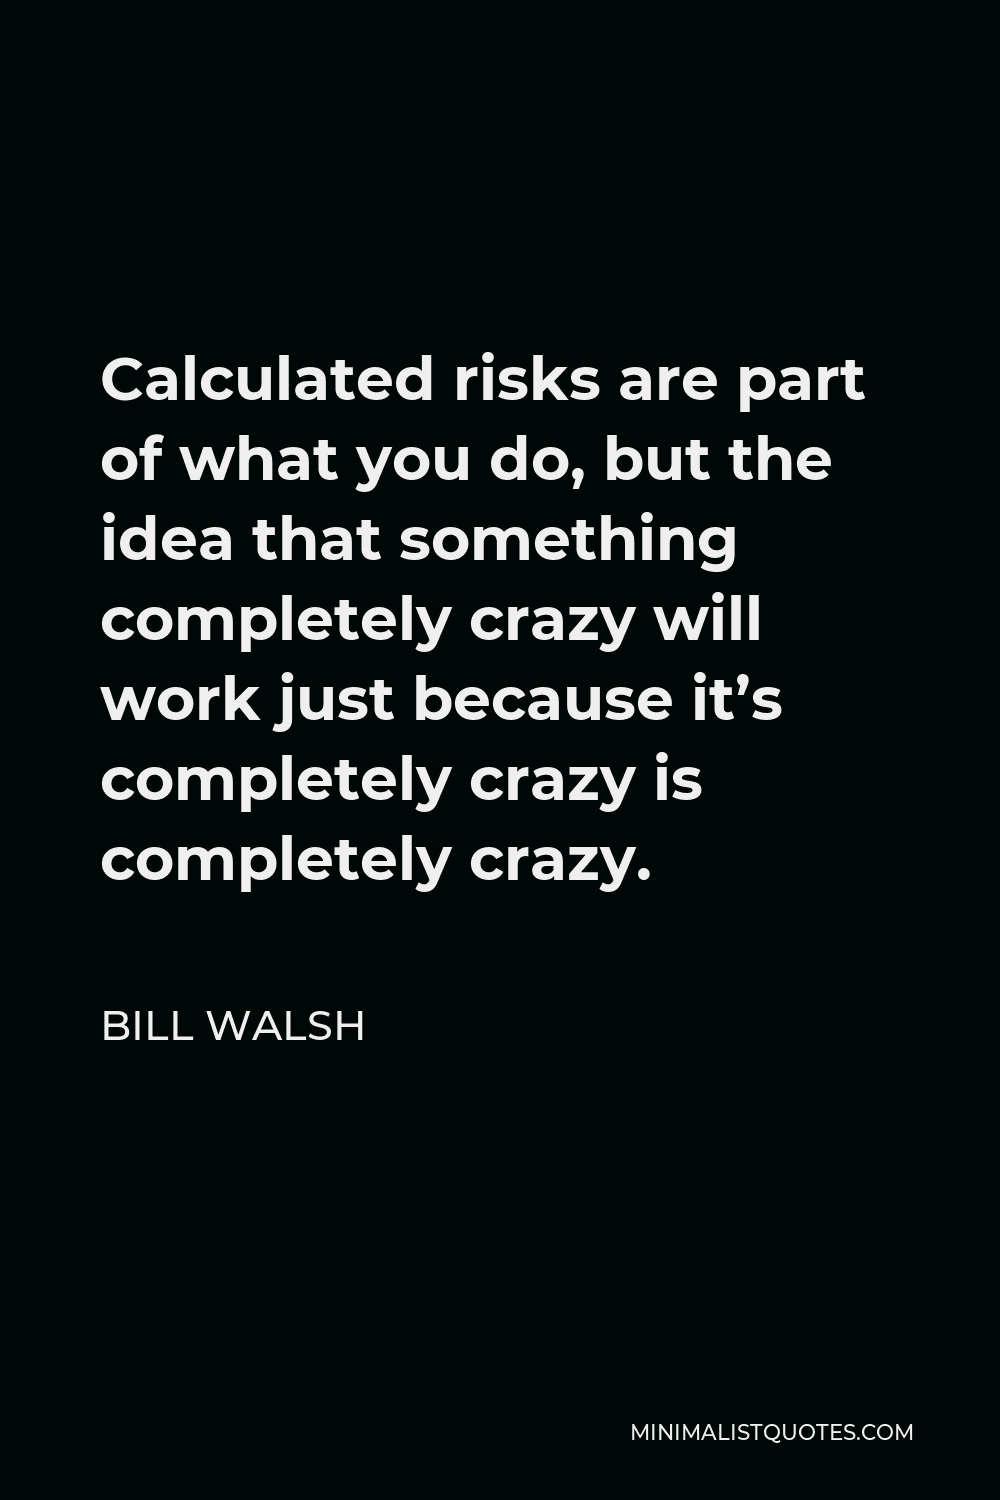 Bill Walsh Quote - Calculated risks are part of what you do, but the idea that something completely crazy will work just because it’s completely crazy is completely crazy.